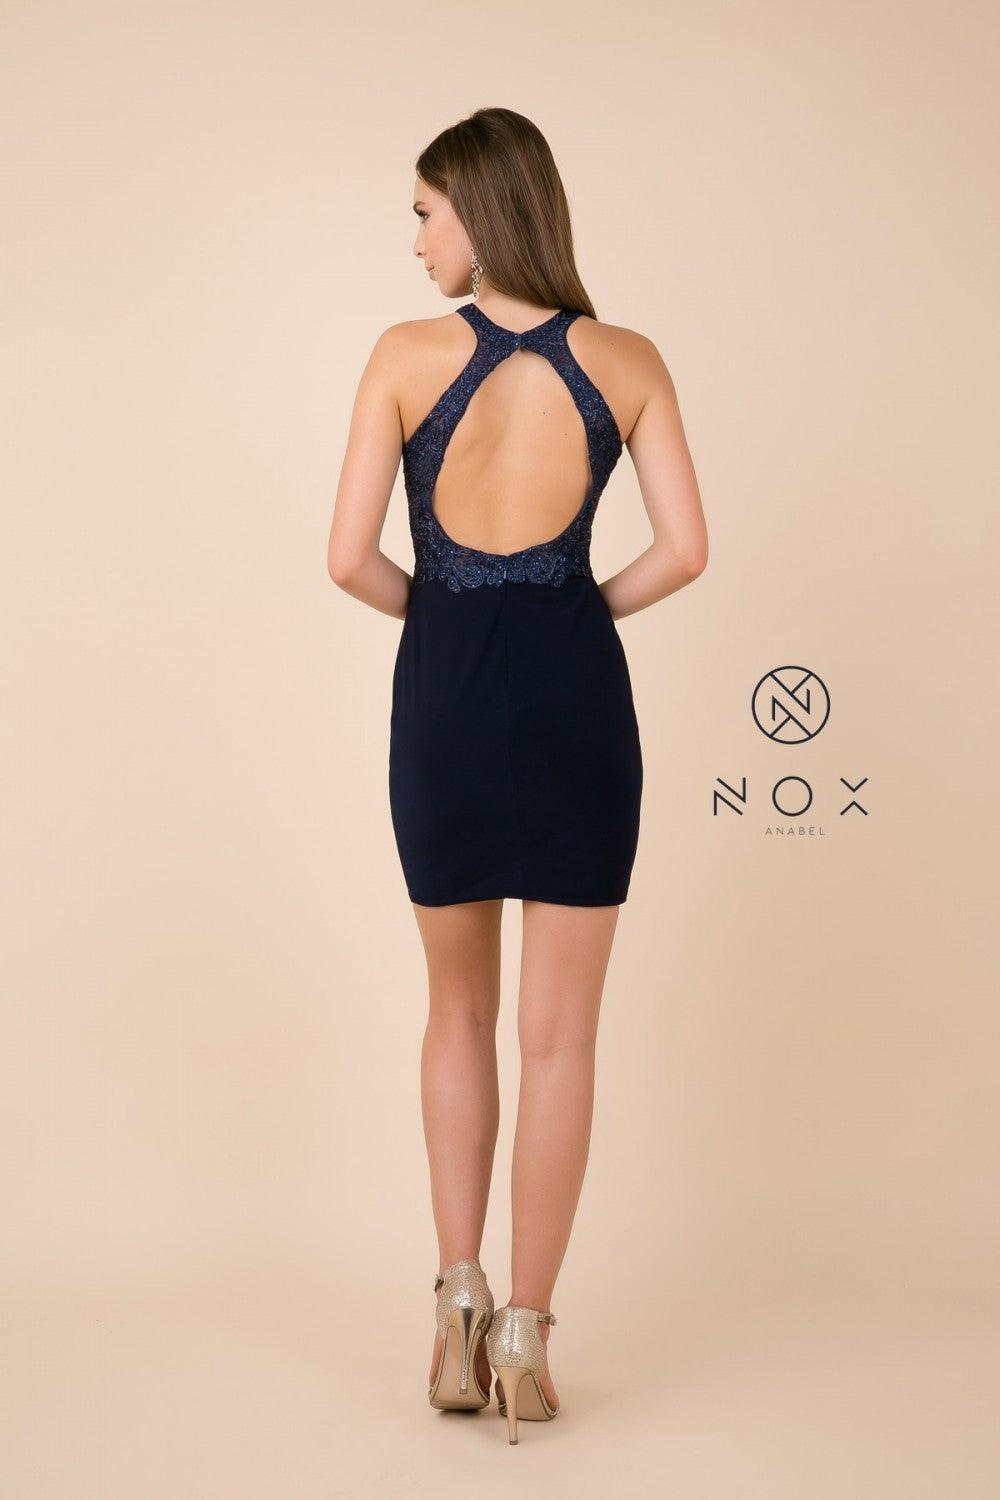 Sexy Short Fitted Dress Formal Cocktail - The Dress Outlet Nox Anabel